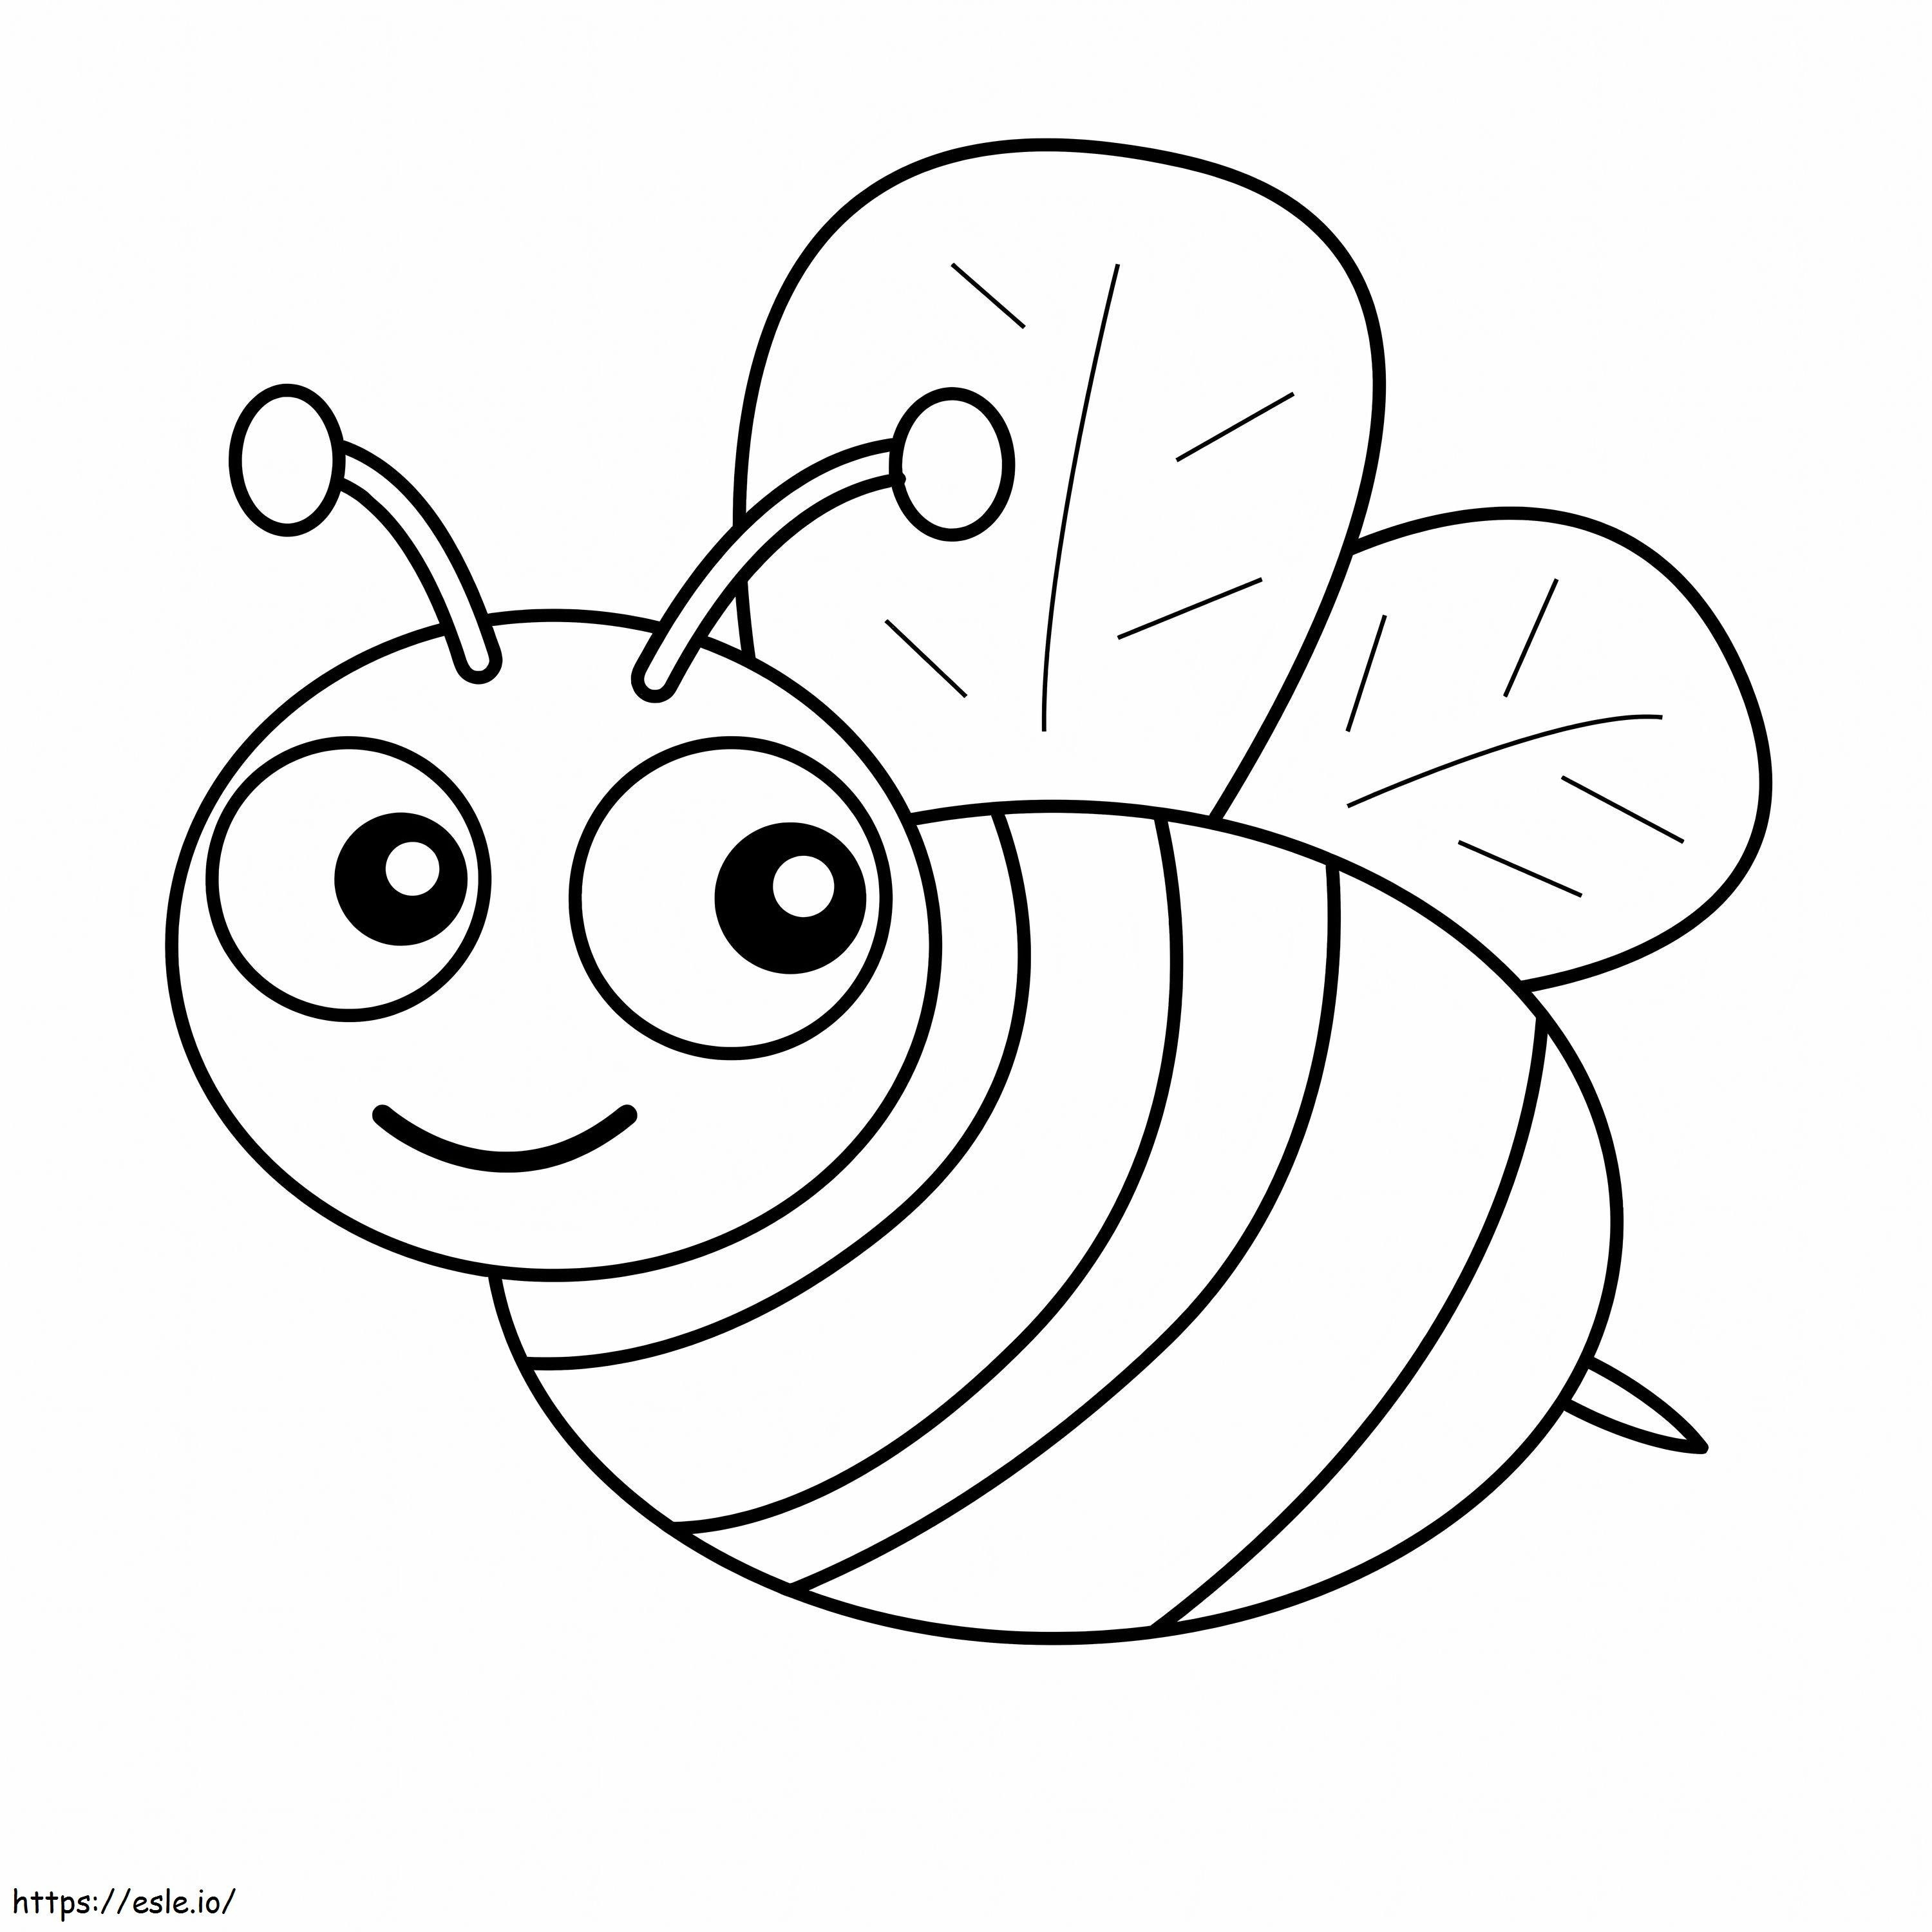 Basic Bee coloring page